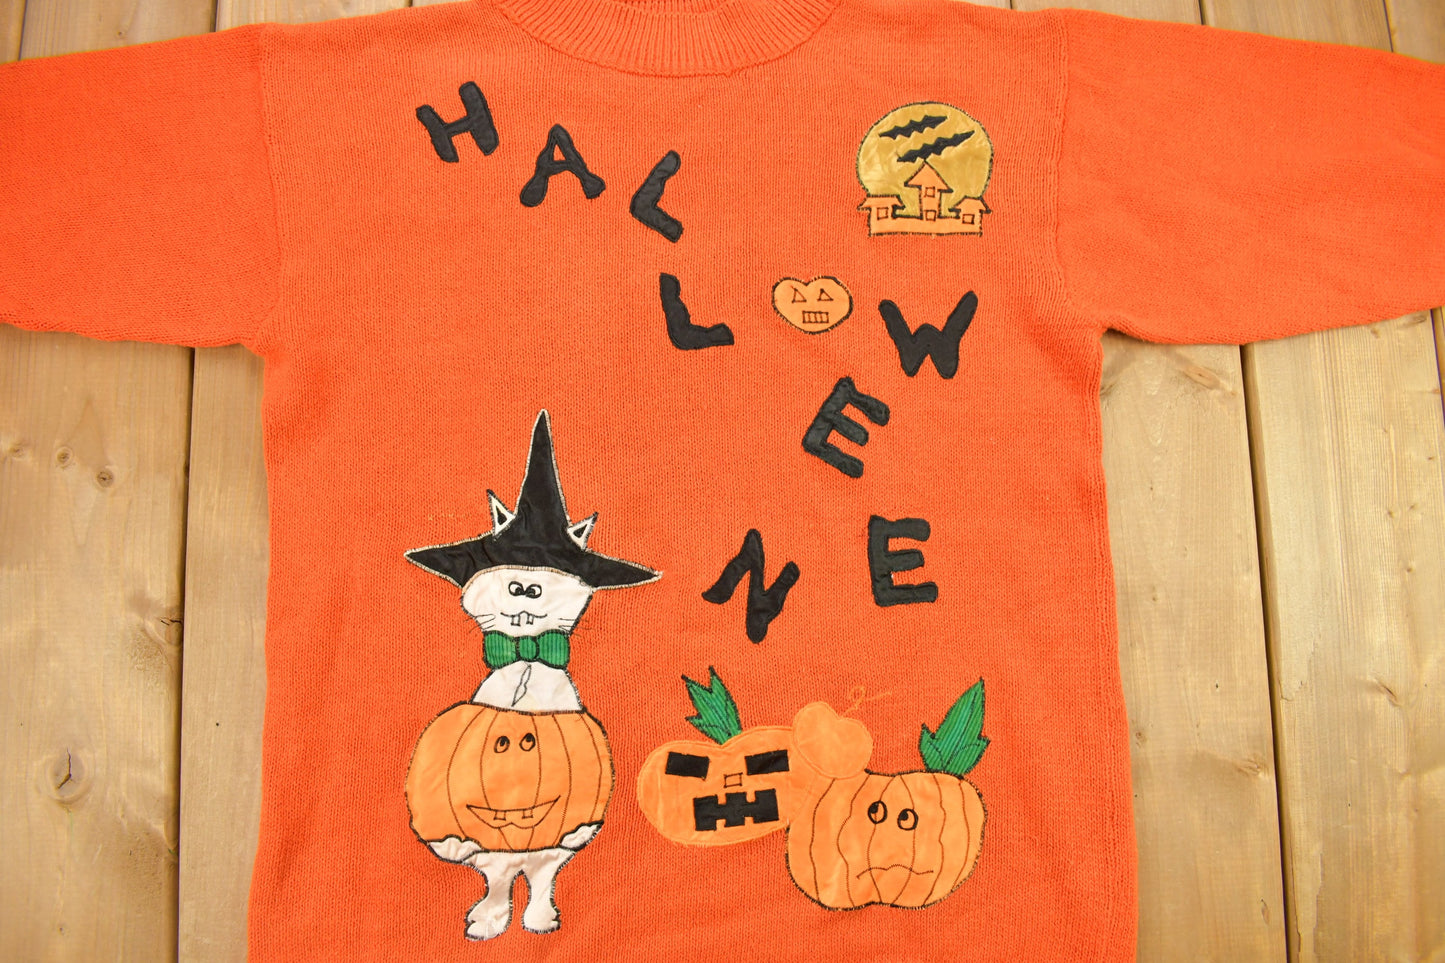 Vintage 1990s Halloween Theme Embroidered Knit Sweater / Vintage 90s Crewneck / Halloween Sweater / Festive / Colleens Collectibles